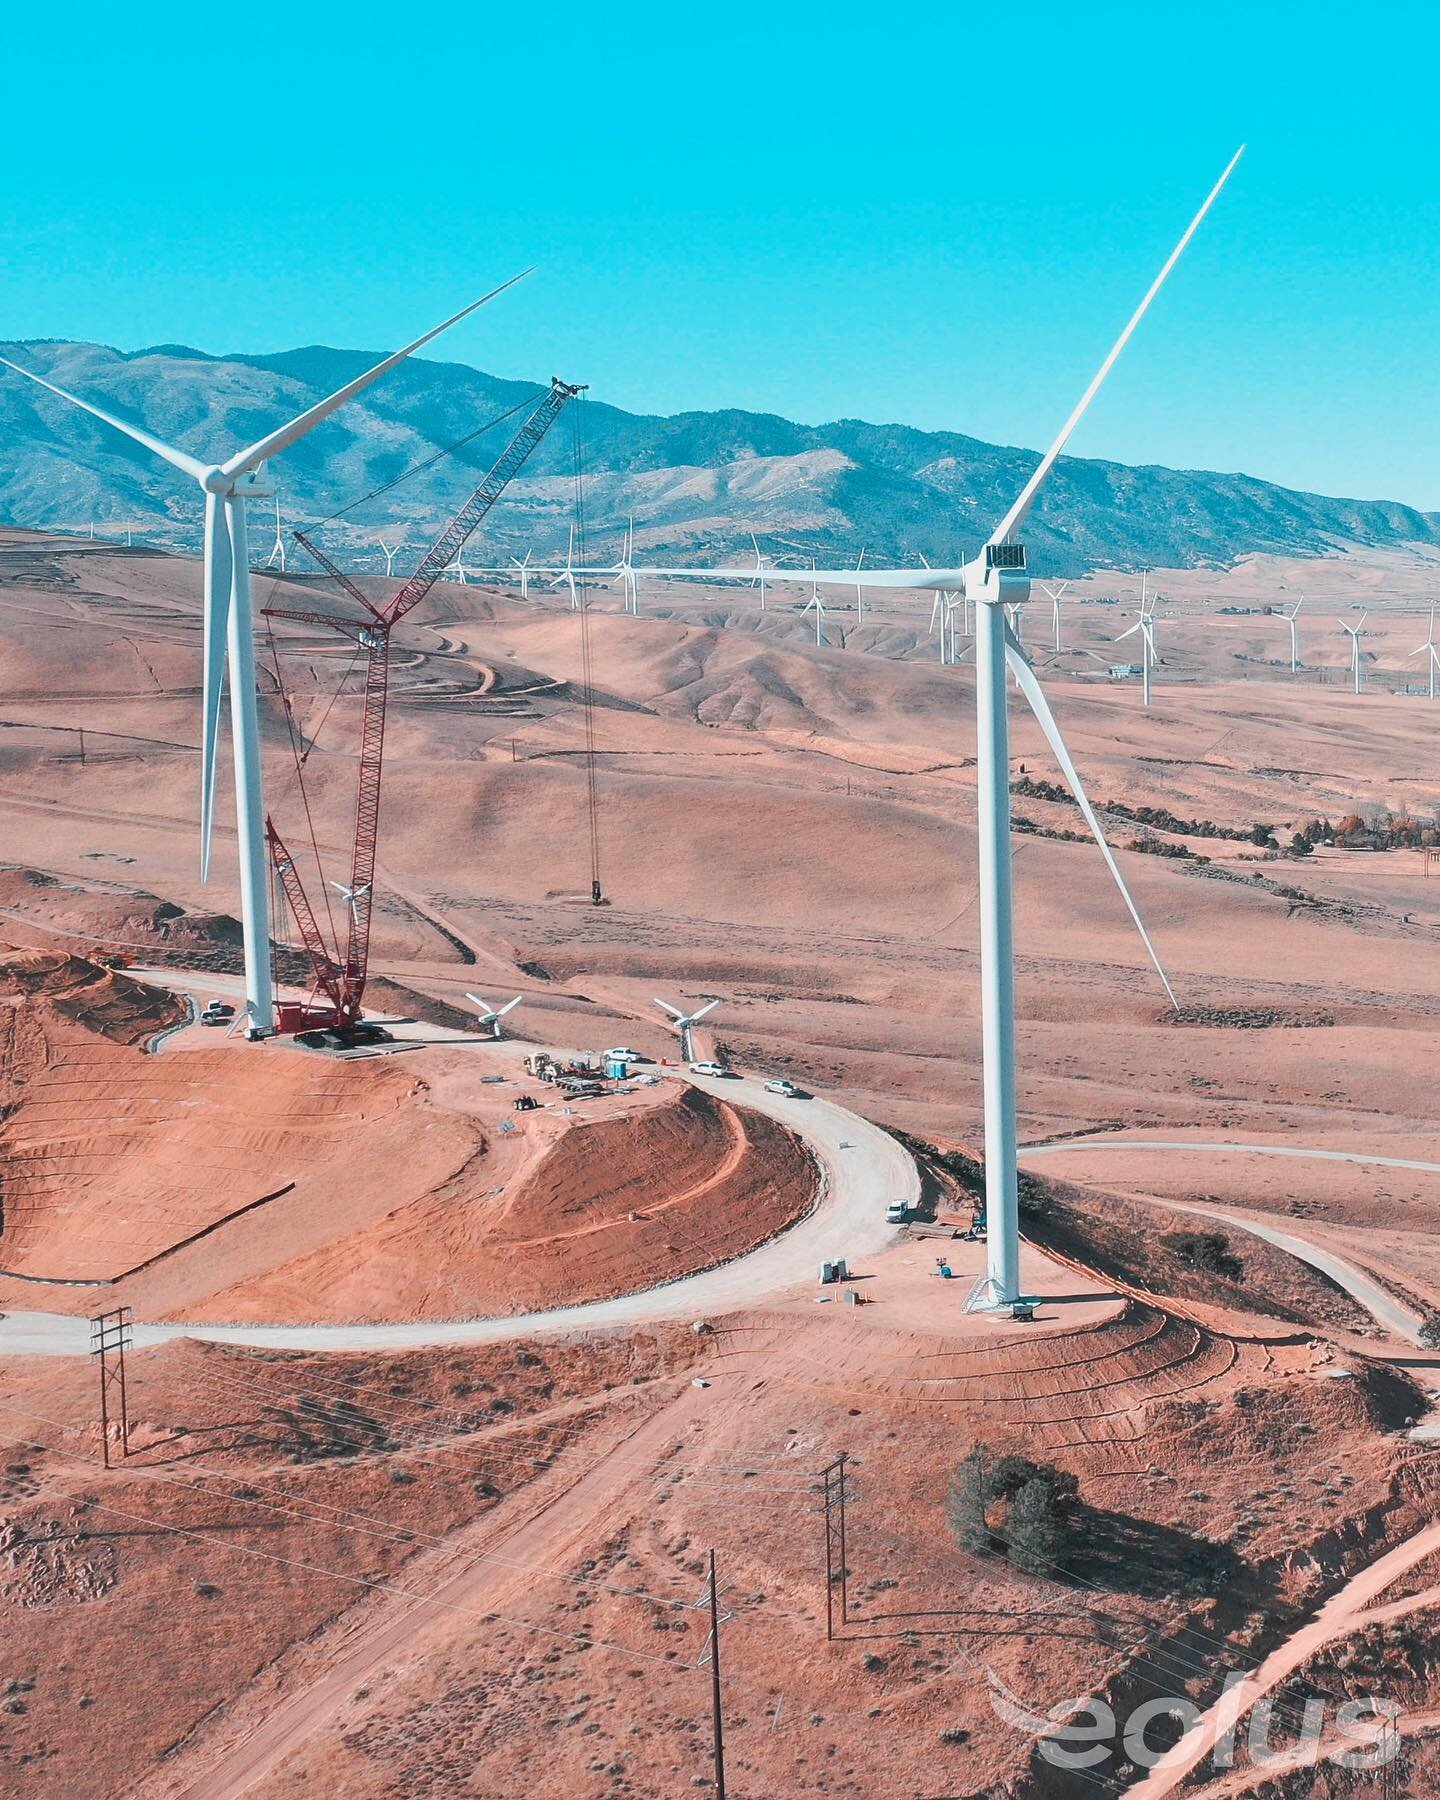 Our repowering project in California, Wind Wall 1, was completed in May 2021. The golden hills of Tehachapi are now home to 13 Vestas V126 wind turbines. At Eolus, we make renewable energy happen.
#WindWall1 #windenergy #windpower #windturbine #vesta